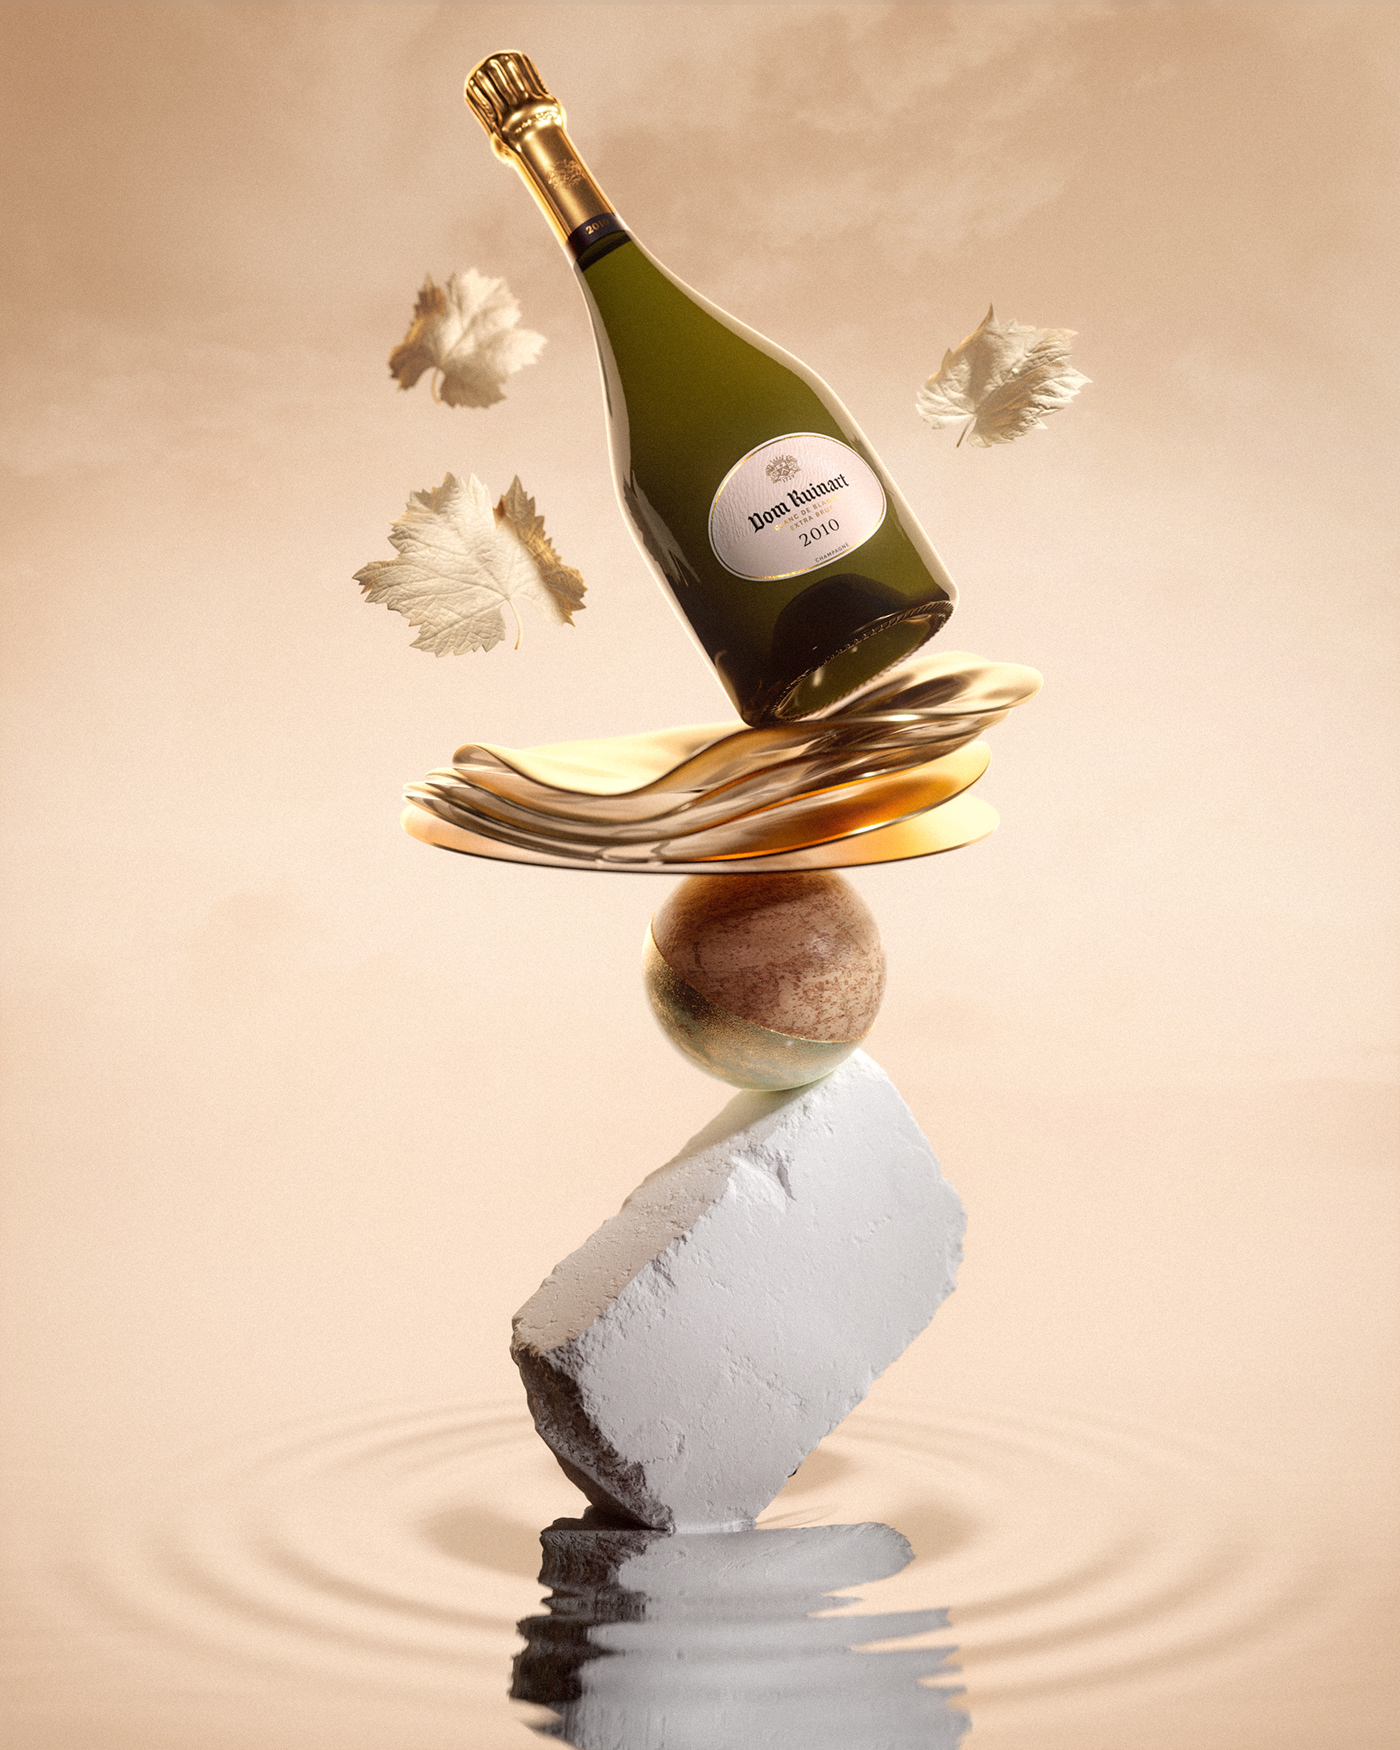 Champagne ruinart modeling 3D product visualization Montreal c4d